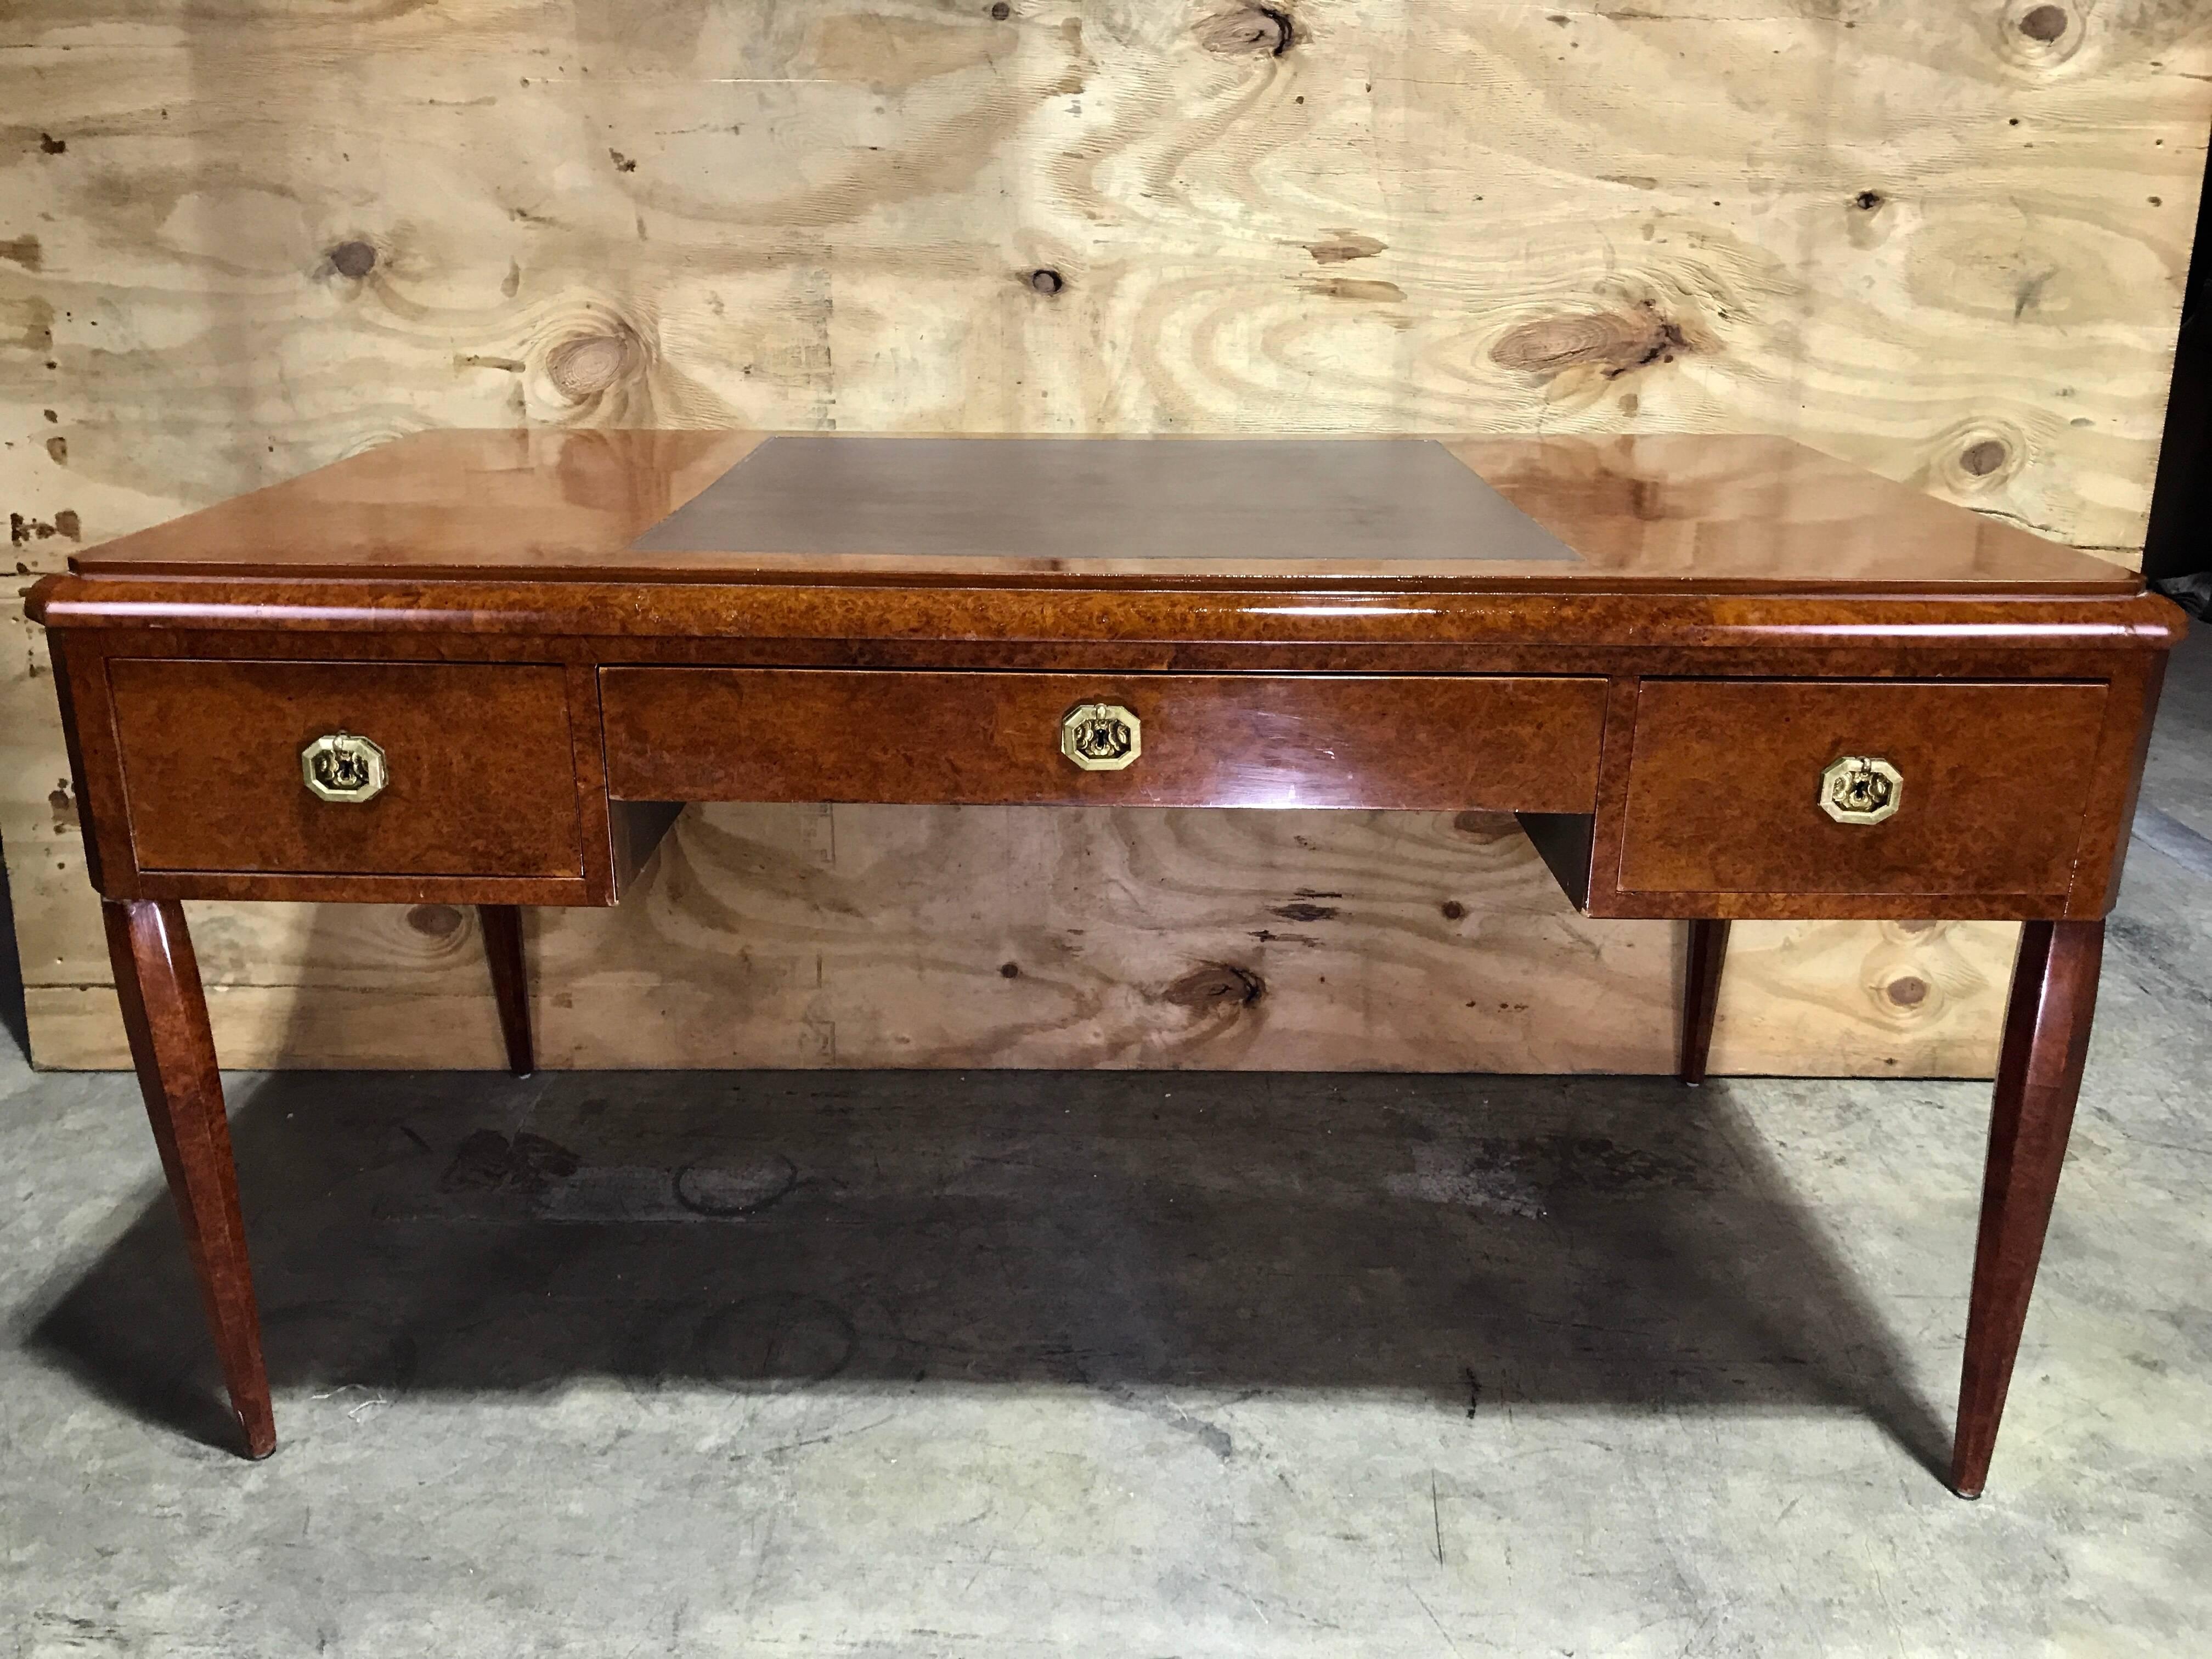 French Art Deco burl wood and leather desk, with pull-out sides and bronze hardware.
